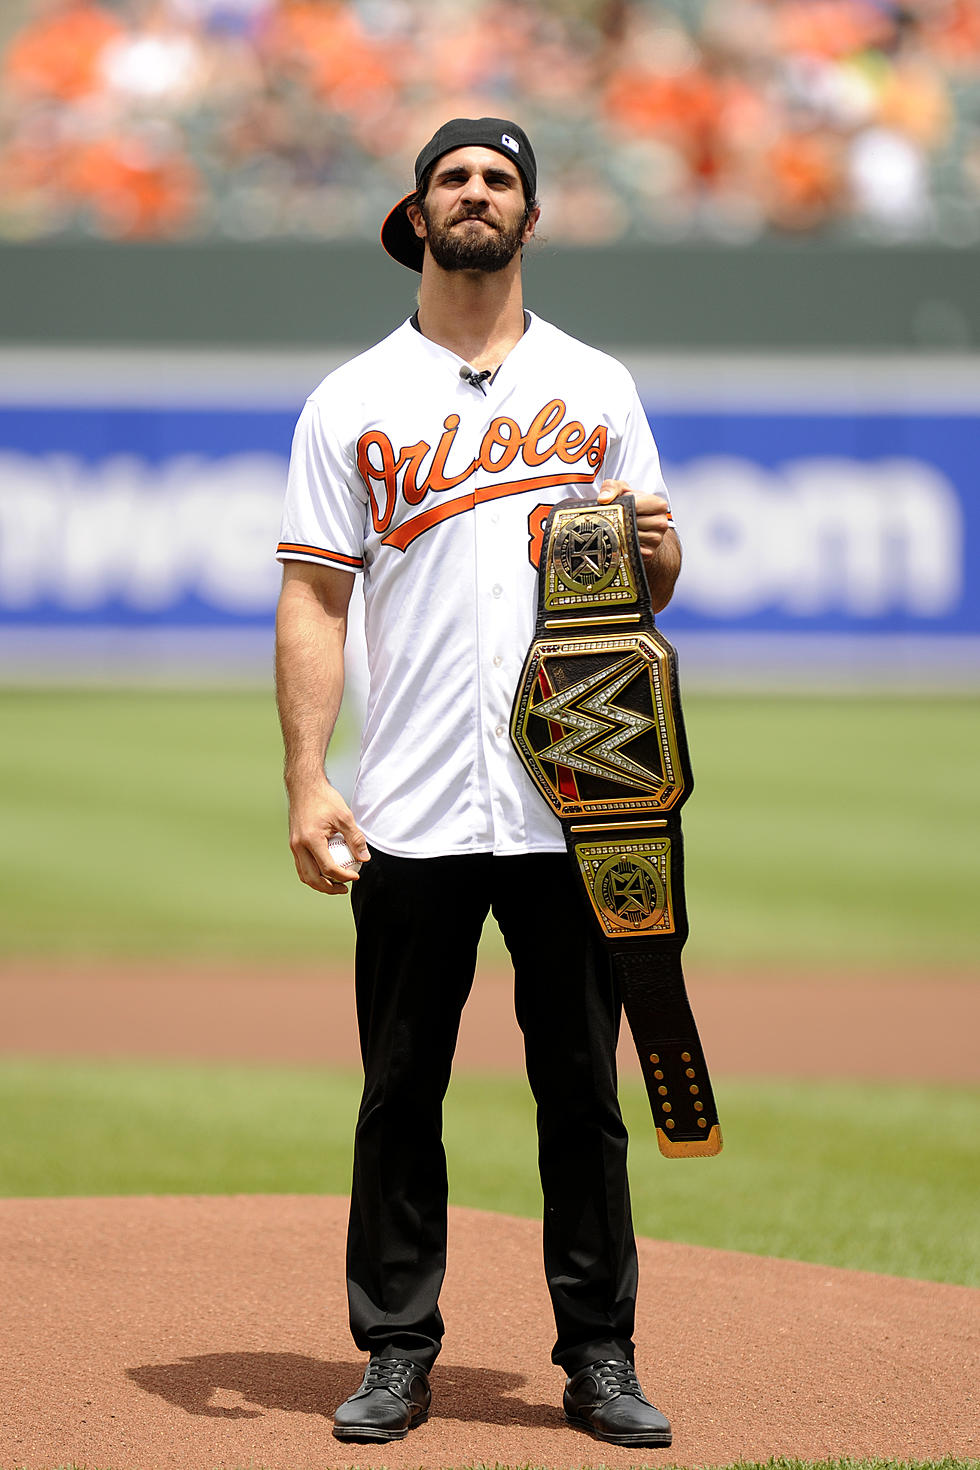 WWE Champion Seth Rollins Throws Out First Pitch at Baltimore Orioles Game